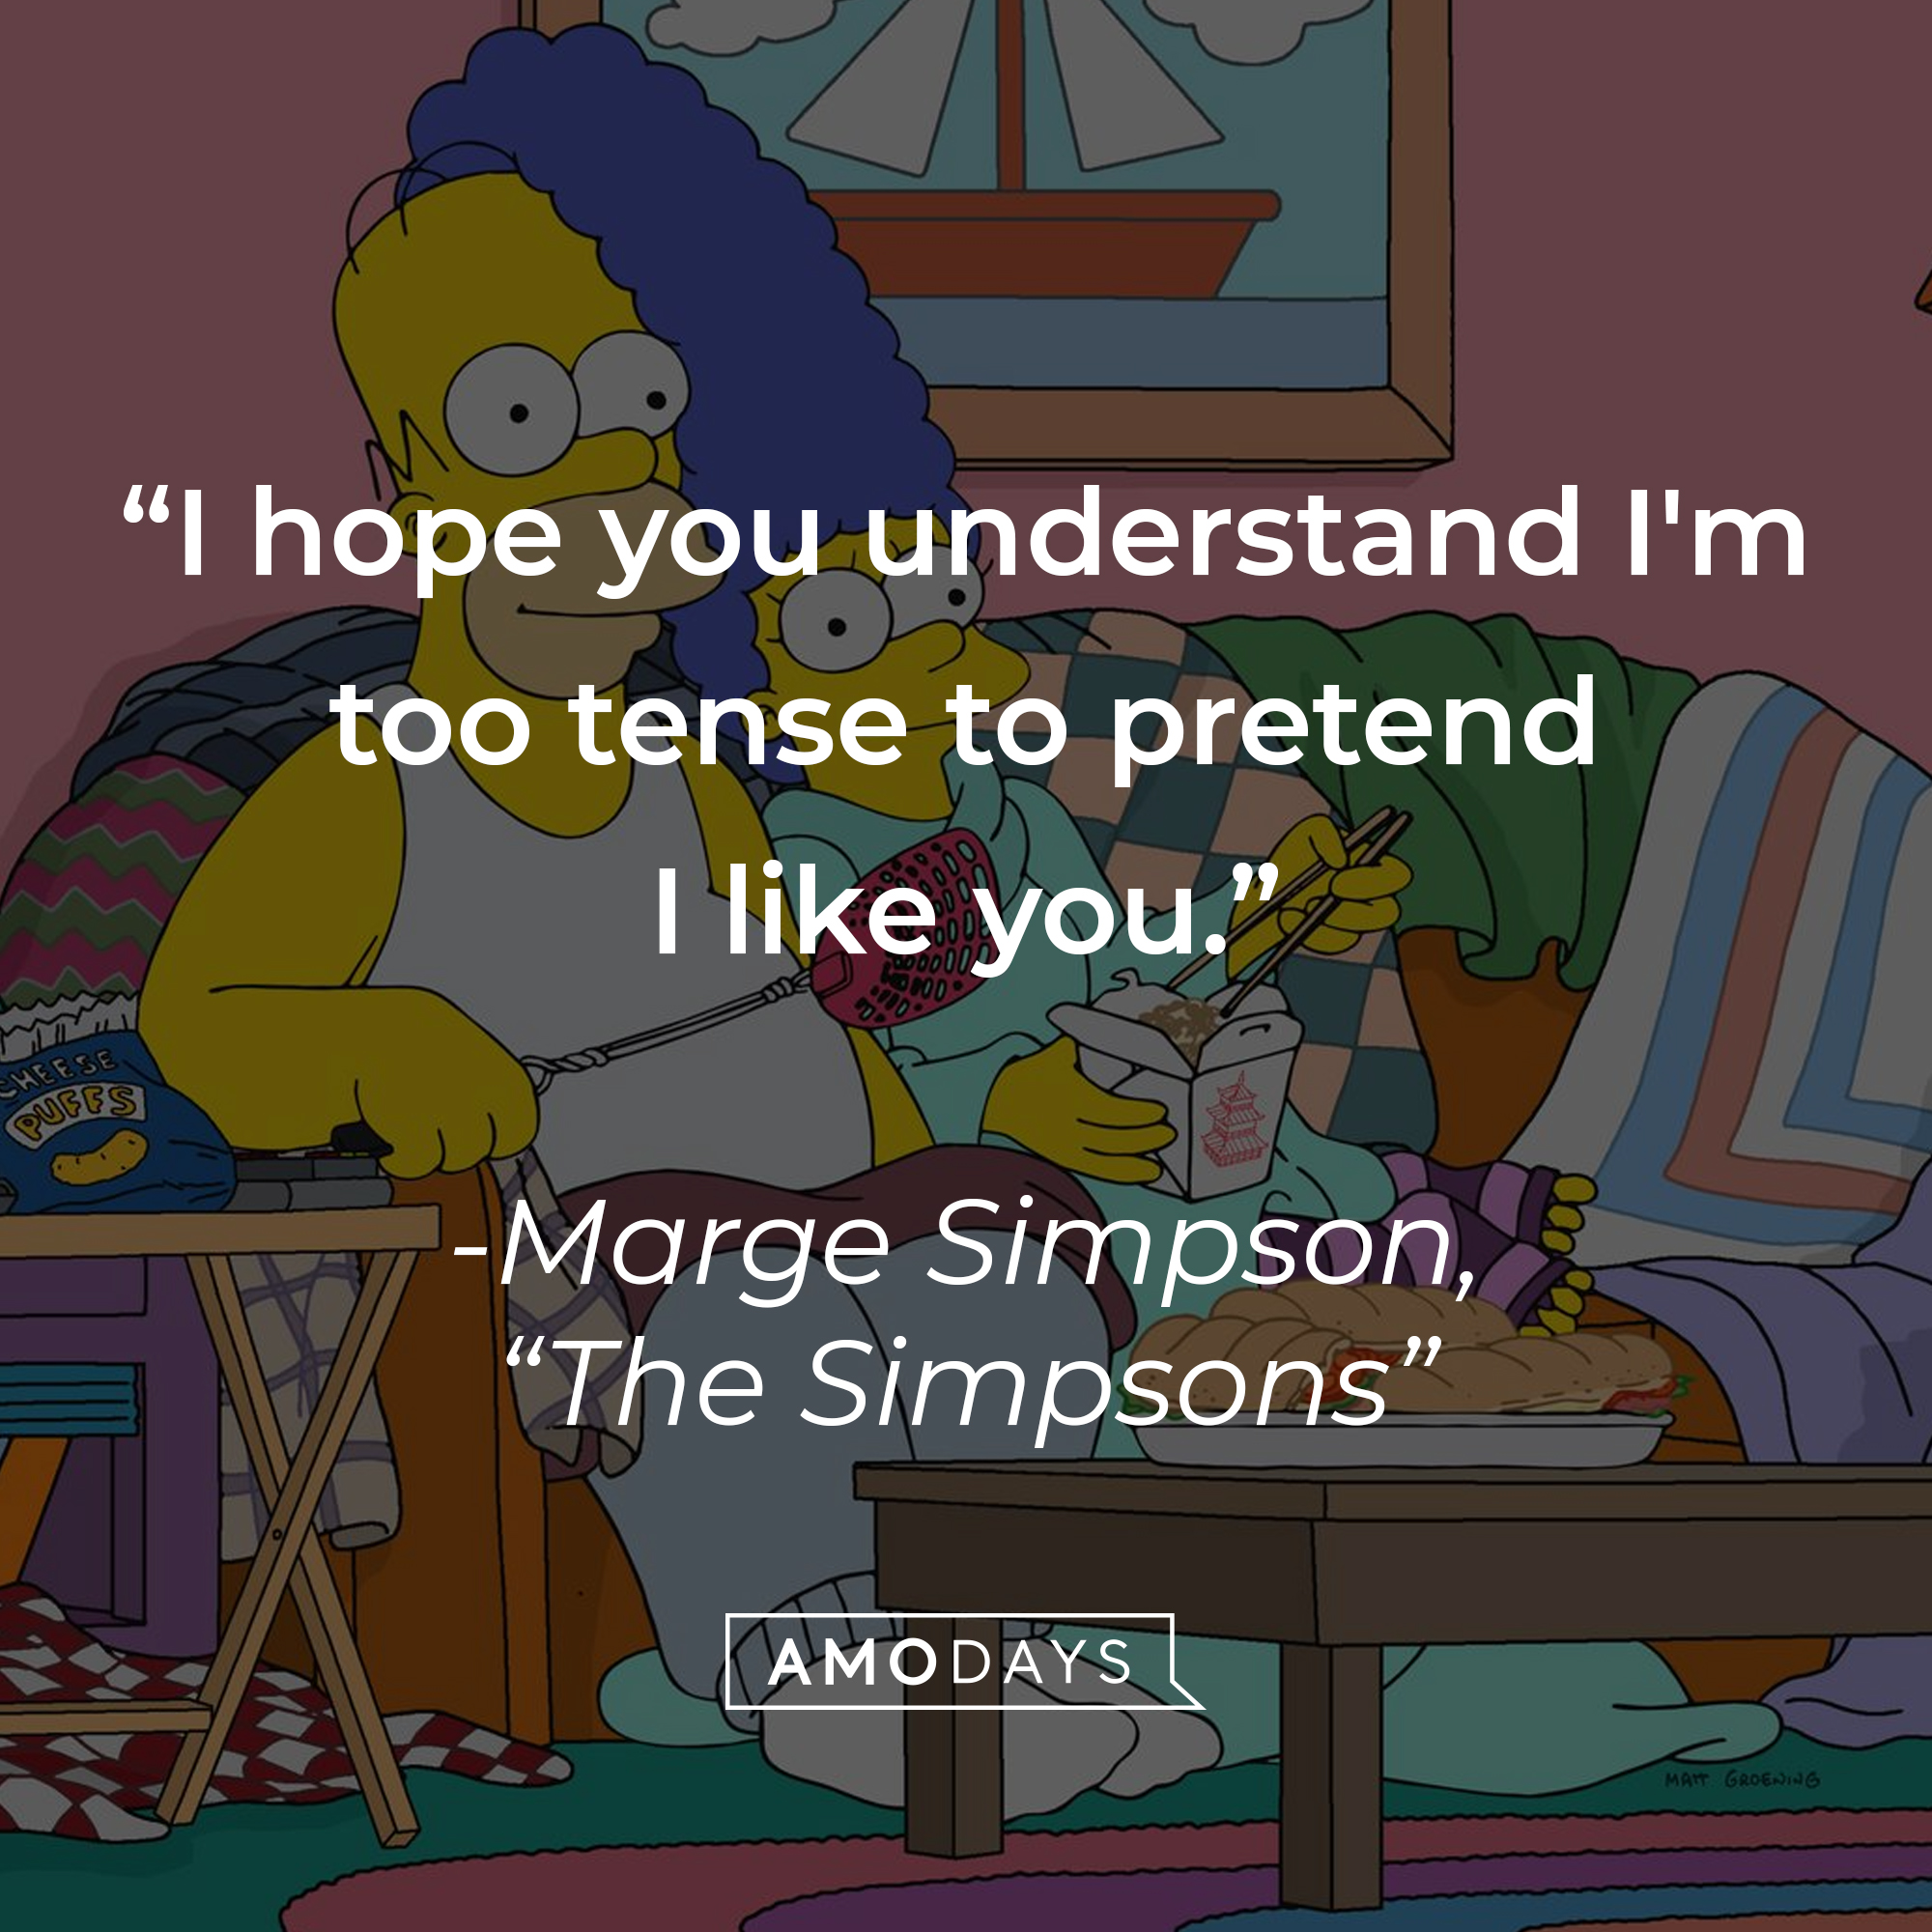 Marge Simpson's quote: "I hope you understand I'm too tense to pretend I like you." | Image: facebook.com/TheSimpsons